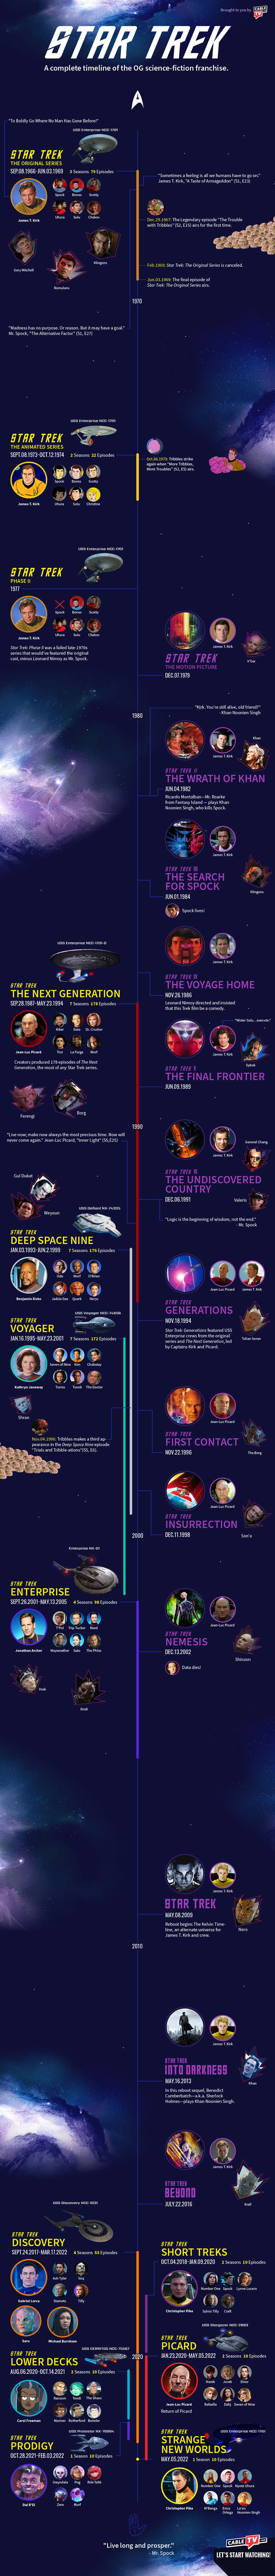 A timeline of Star Trek series, episodes, and trivia from 1966 to present.